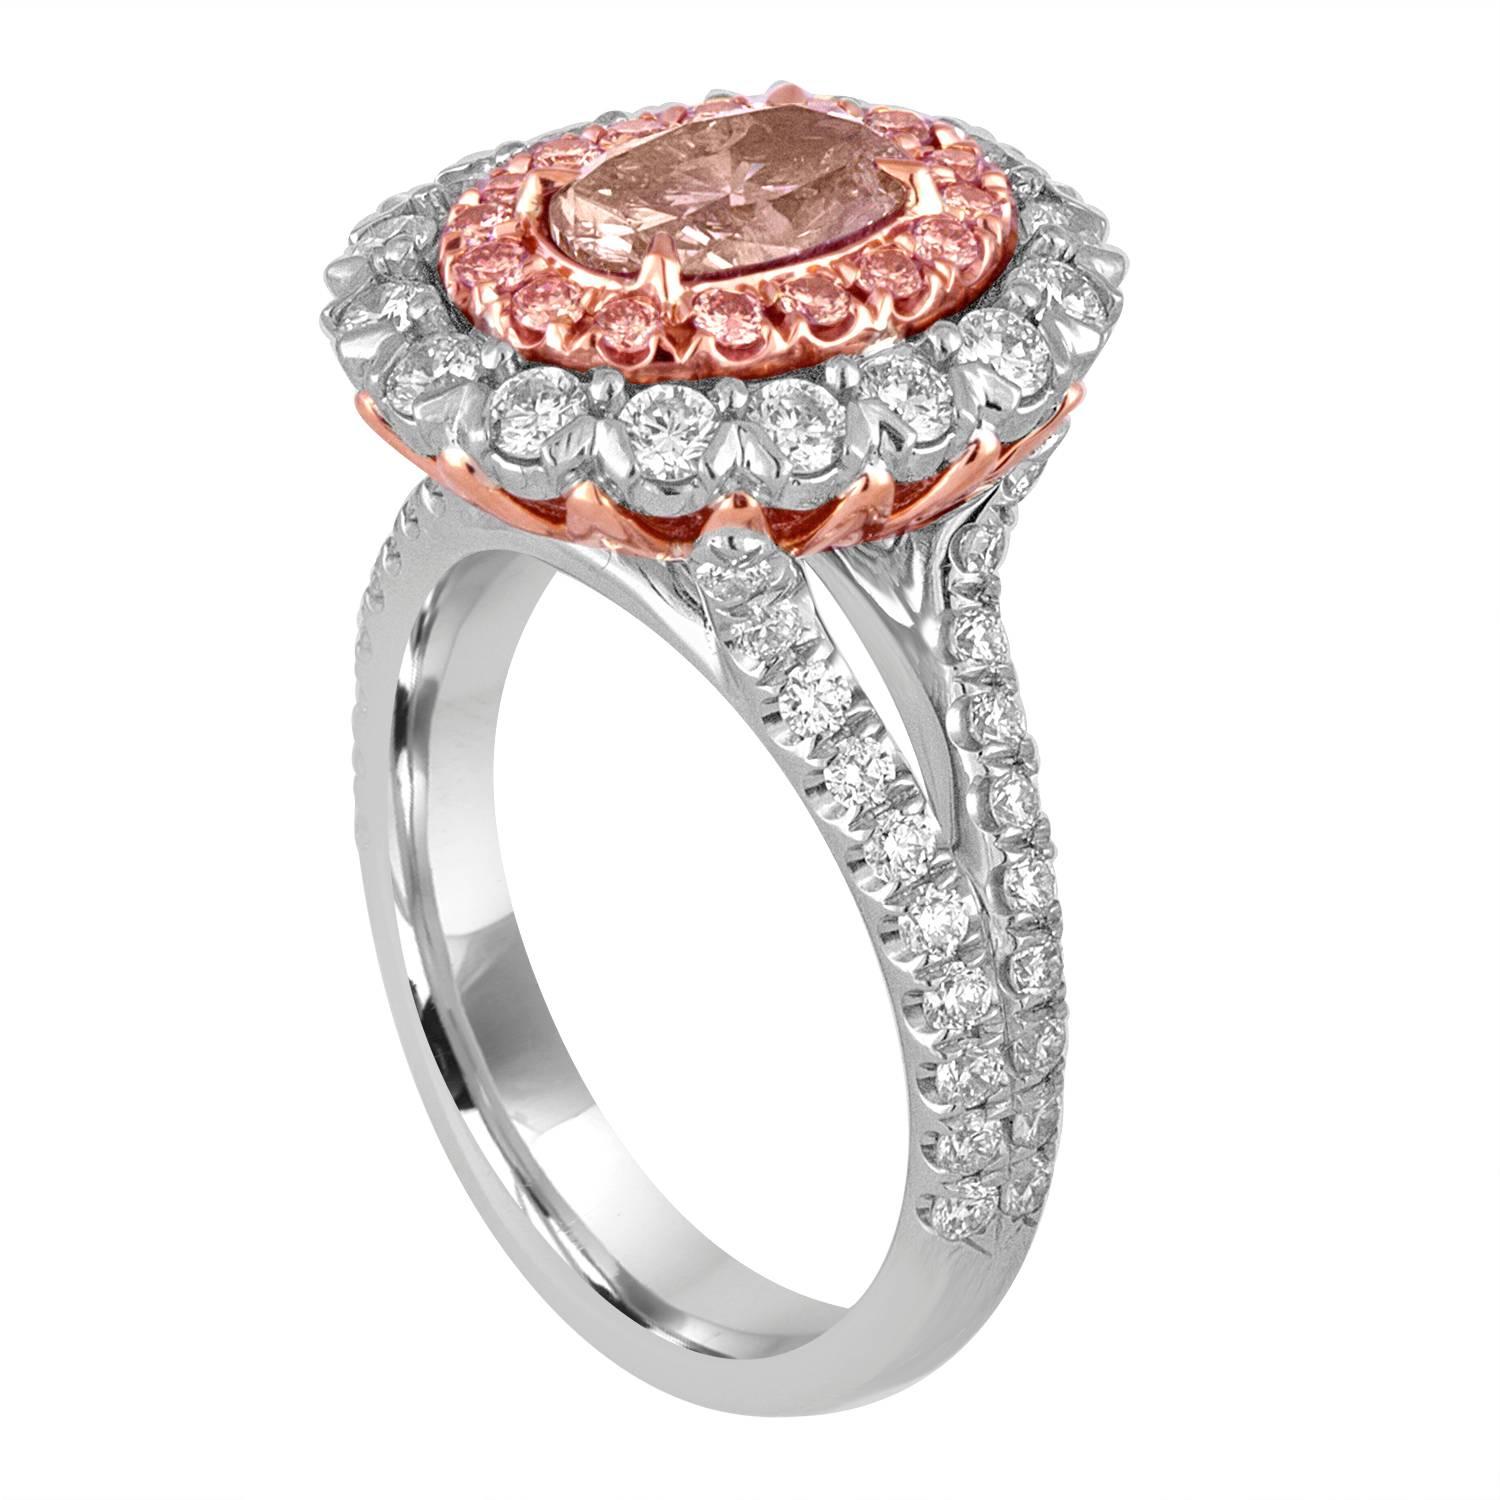 1.10 Carat GIA Certified Fancy Brownish Pink and White Diamond Platinum Ring For Sale